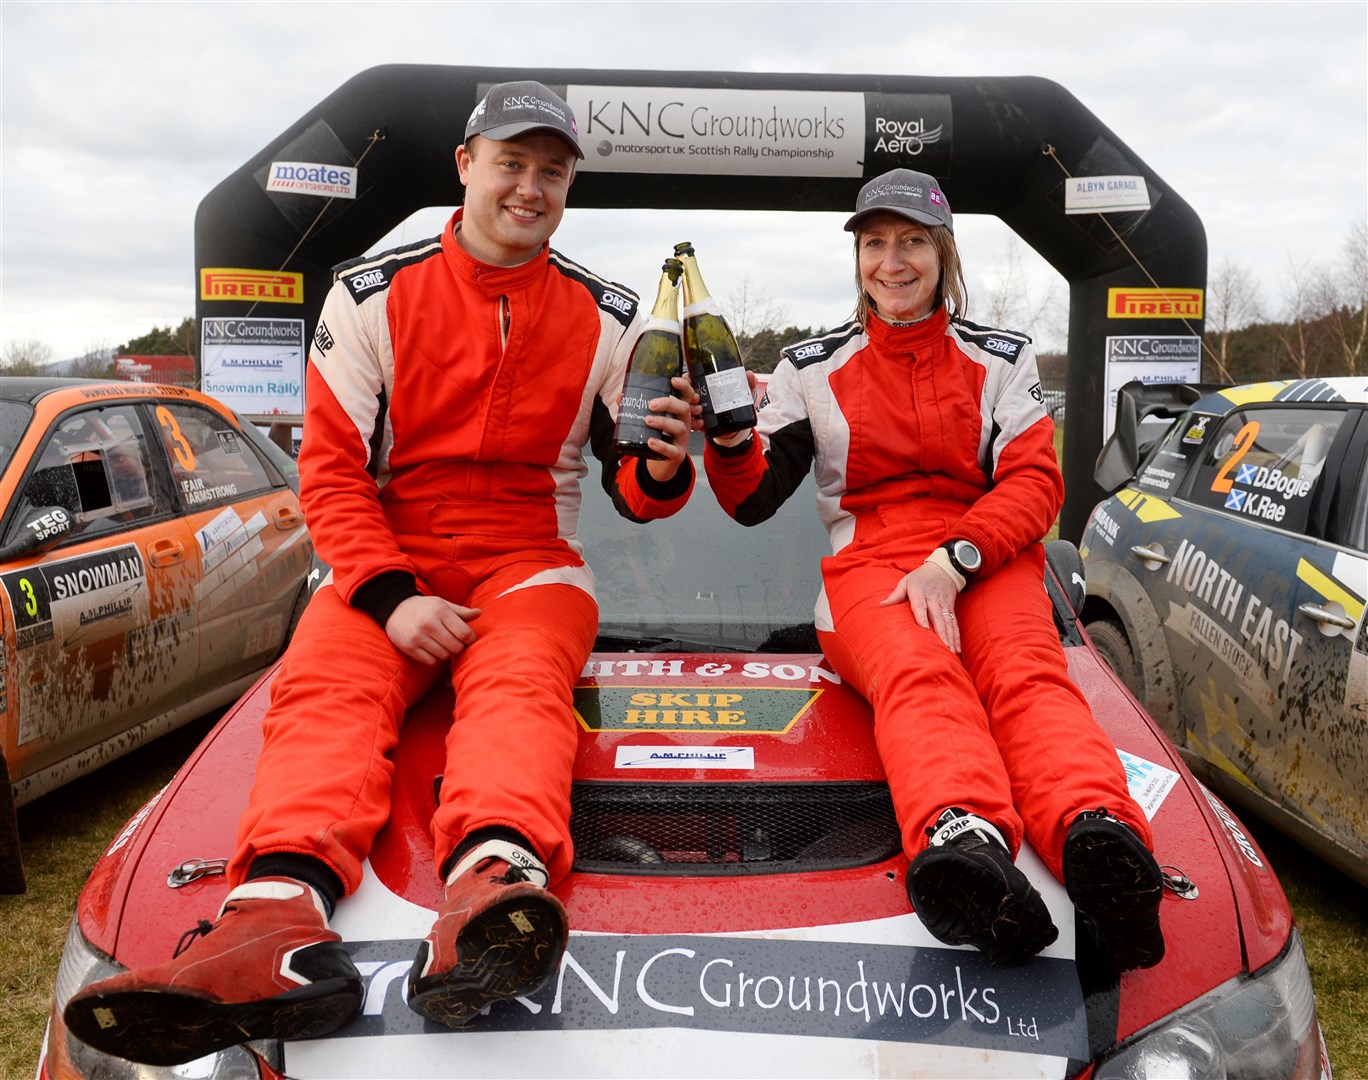 Winners Michael Binnie and Claire Mole. Picture Gary Anthony.